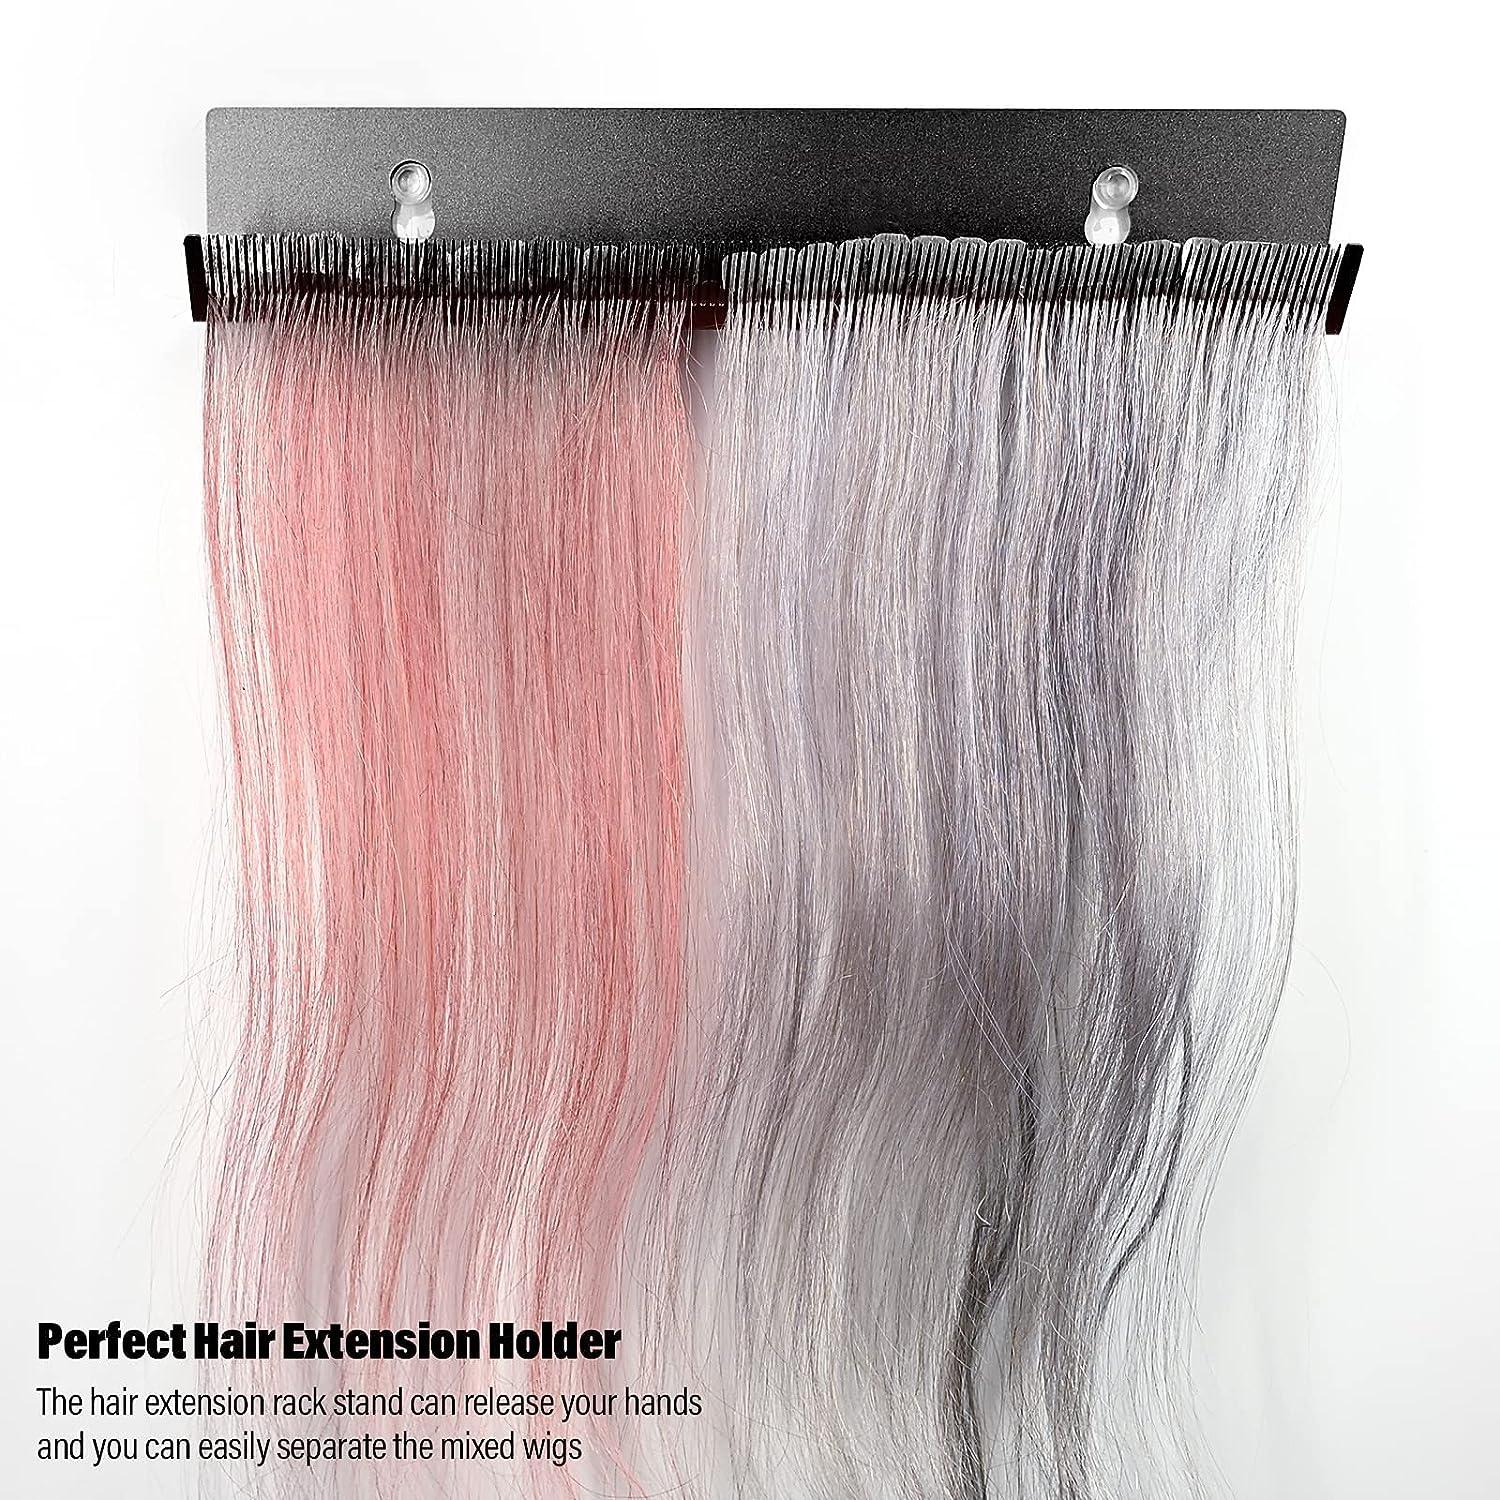 EHDIS Hair Extension Holder for Styling Hair Stands Stainless